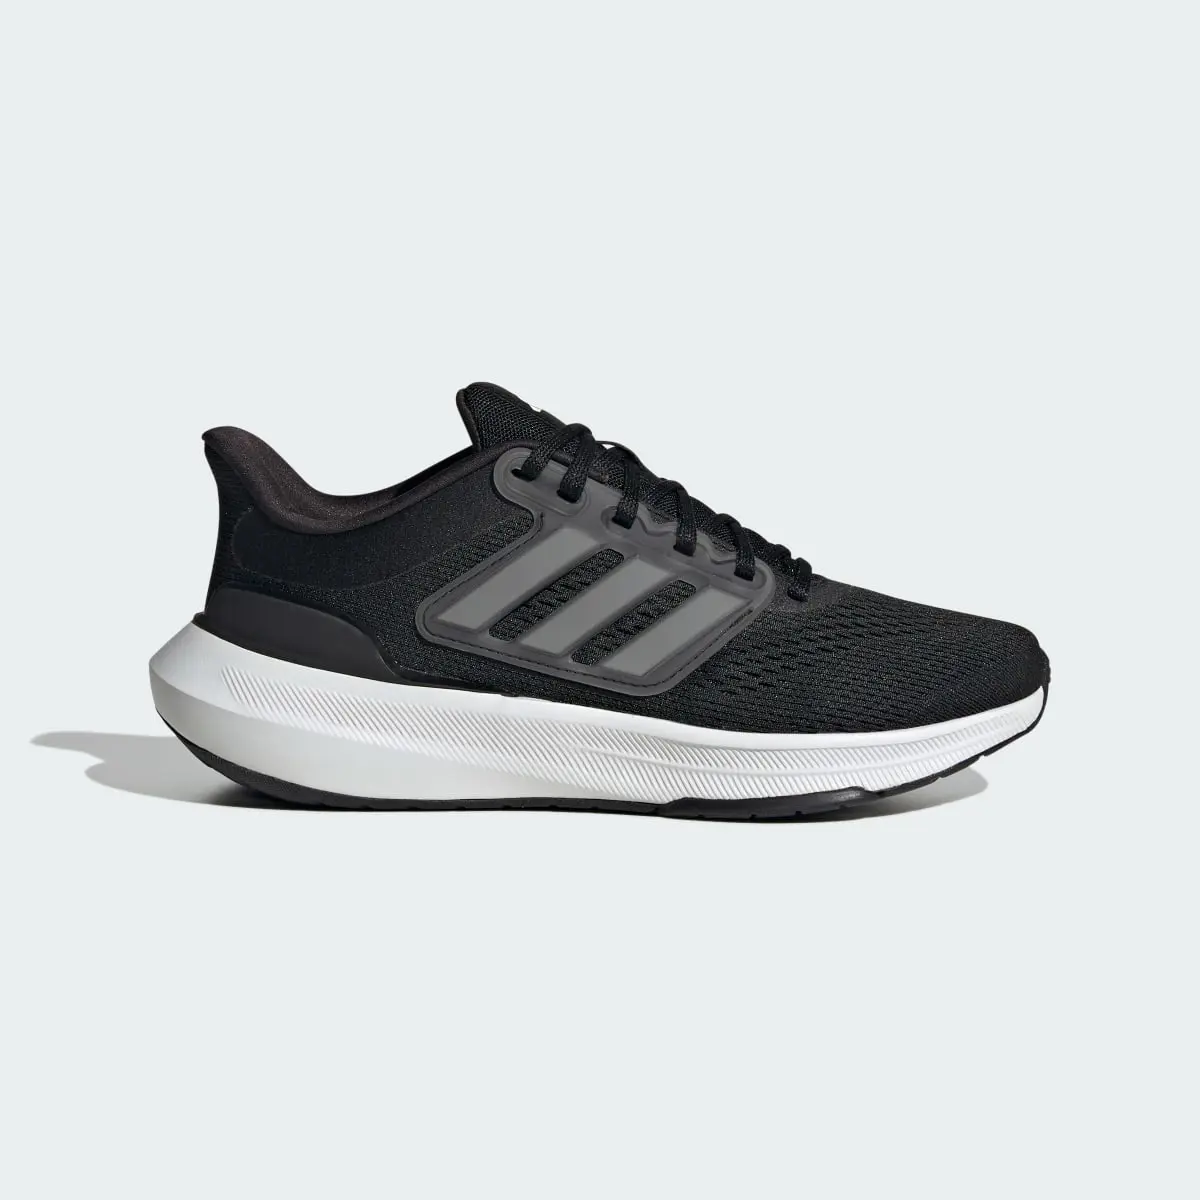 Adidas Ultrabounce Wide Shoes. 2